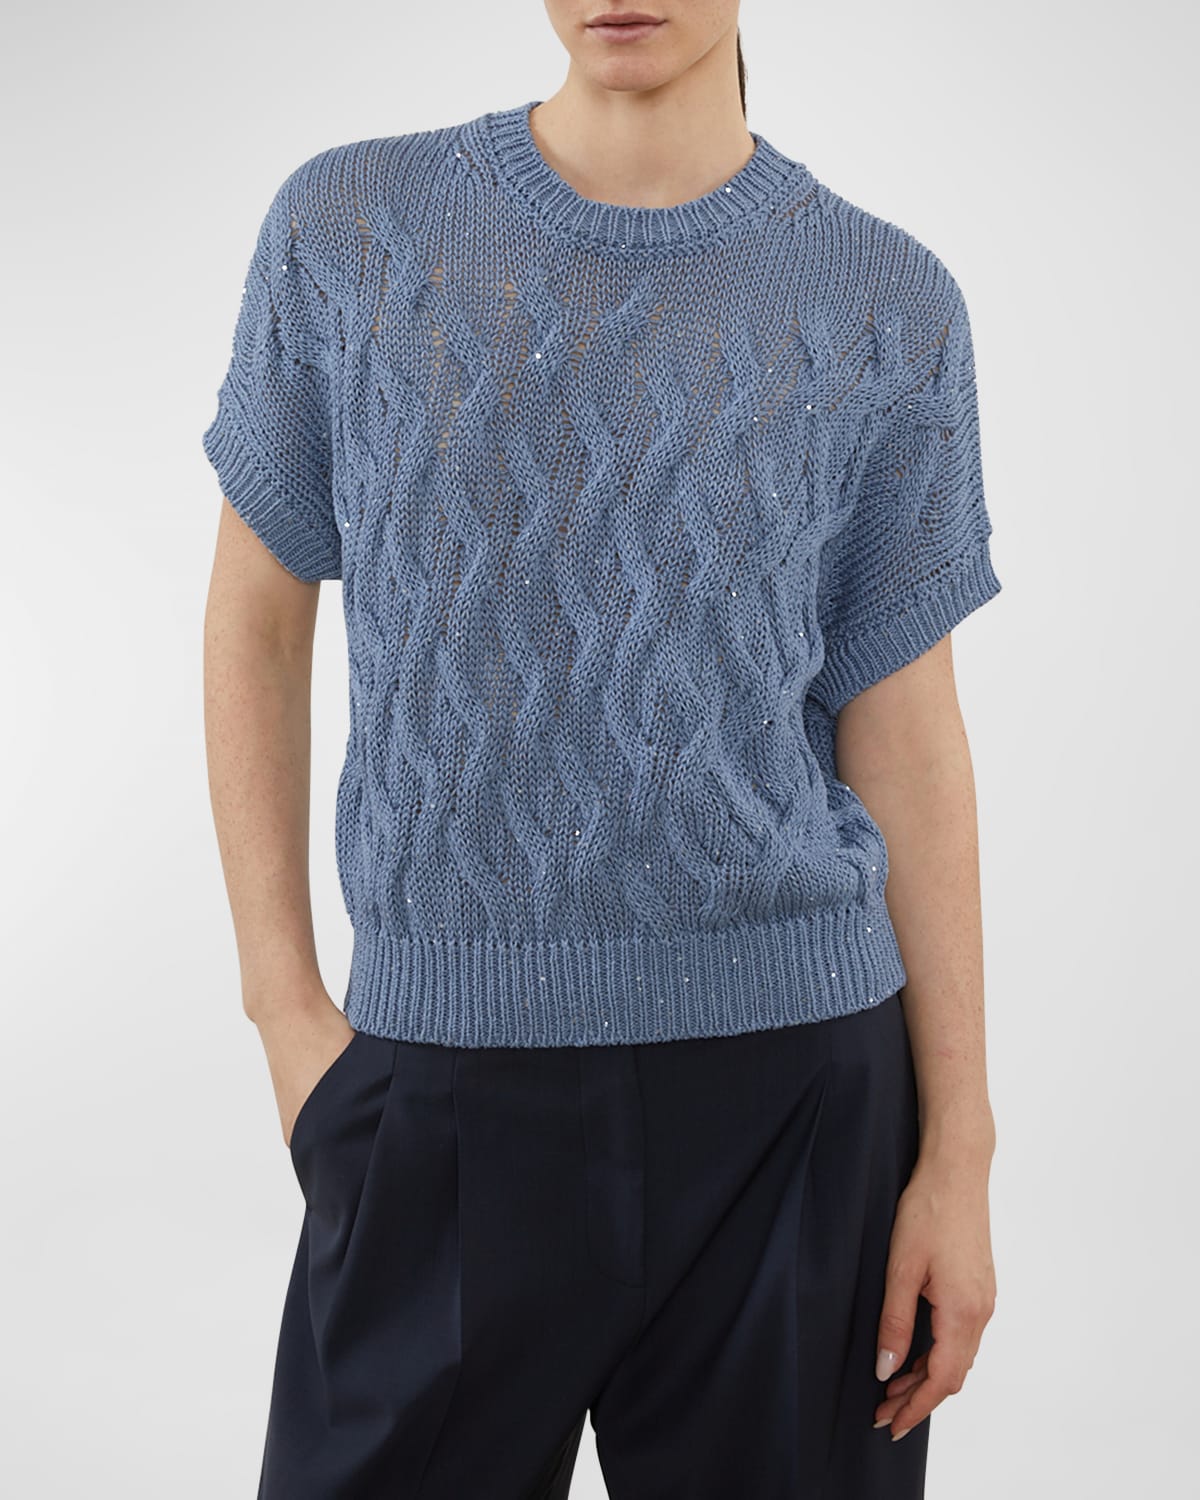 PESERICO SHORT-SLEEVE CABLE-KNIT CREWNECK SWEATER